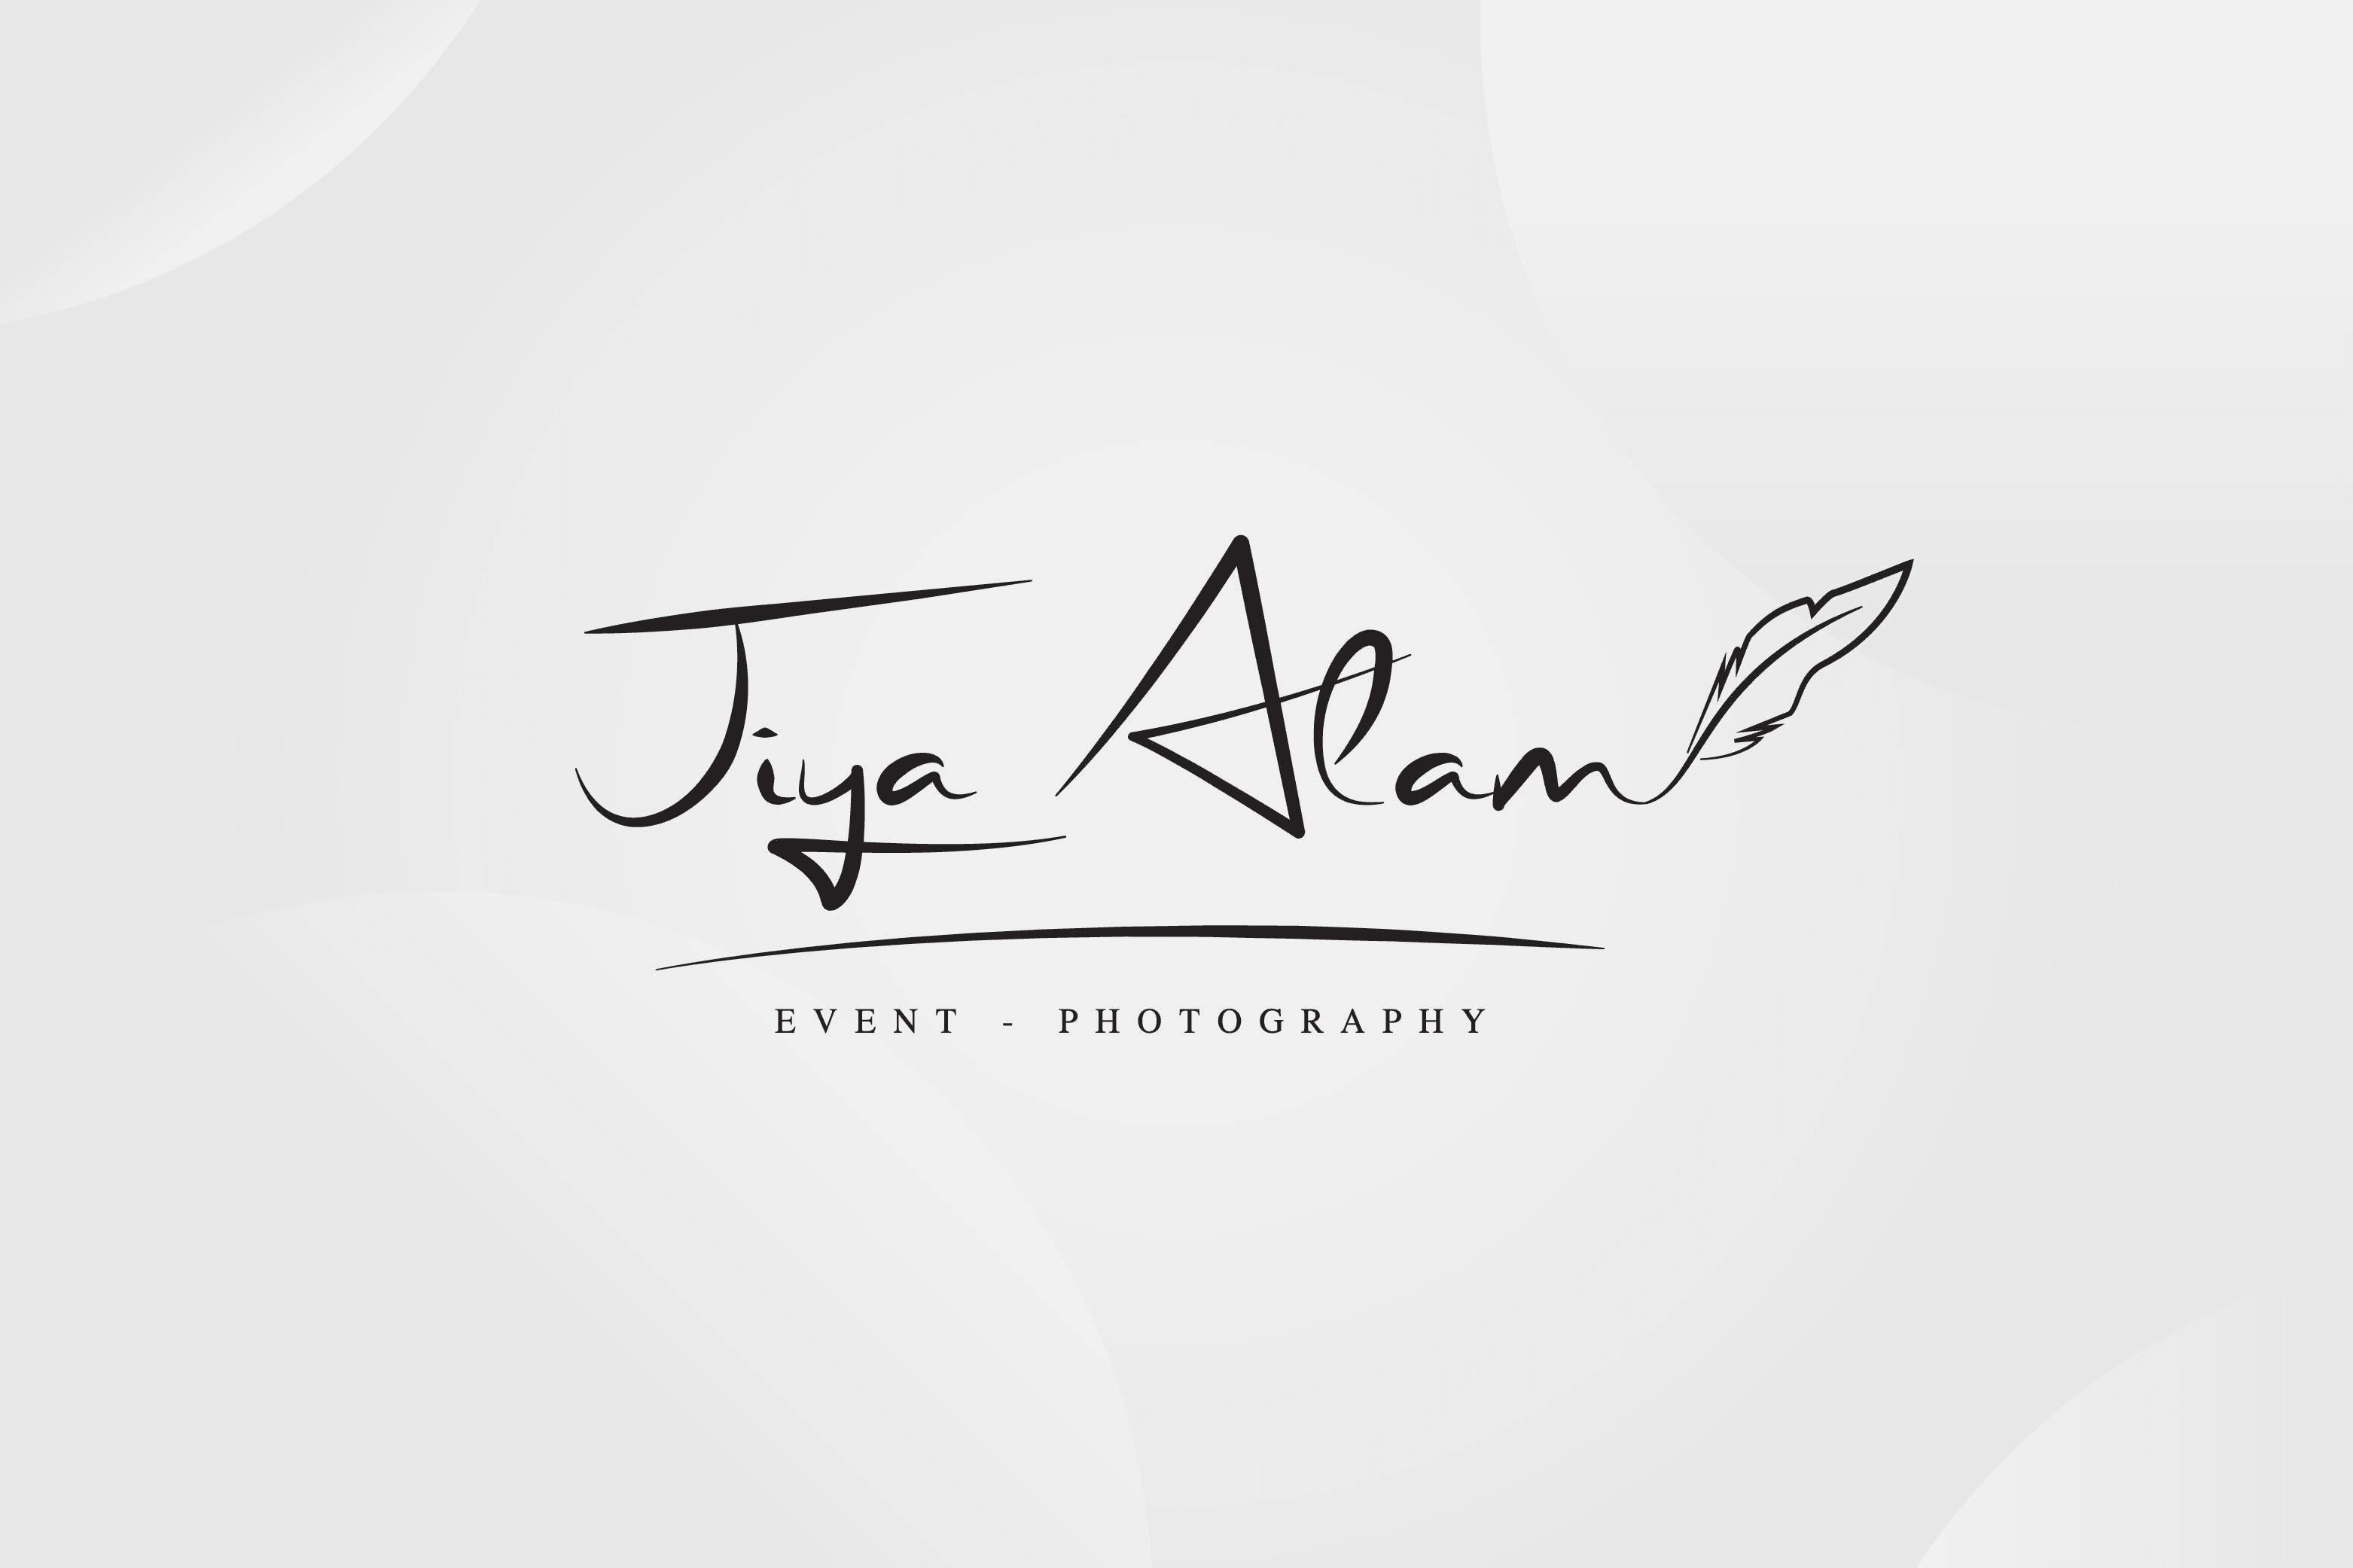 Create A Email Signature Or Best Signature Logo Design By Jiya Alam Fiverr